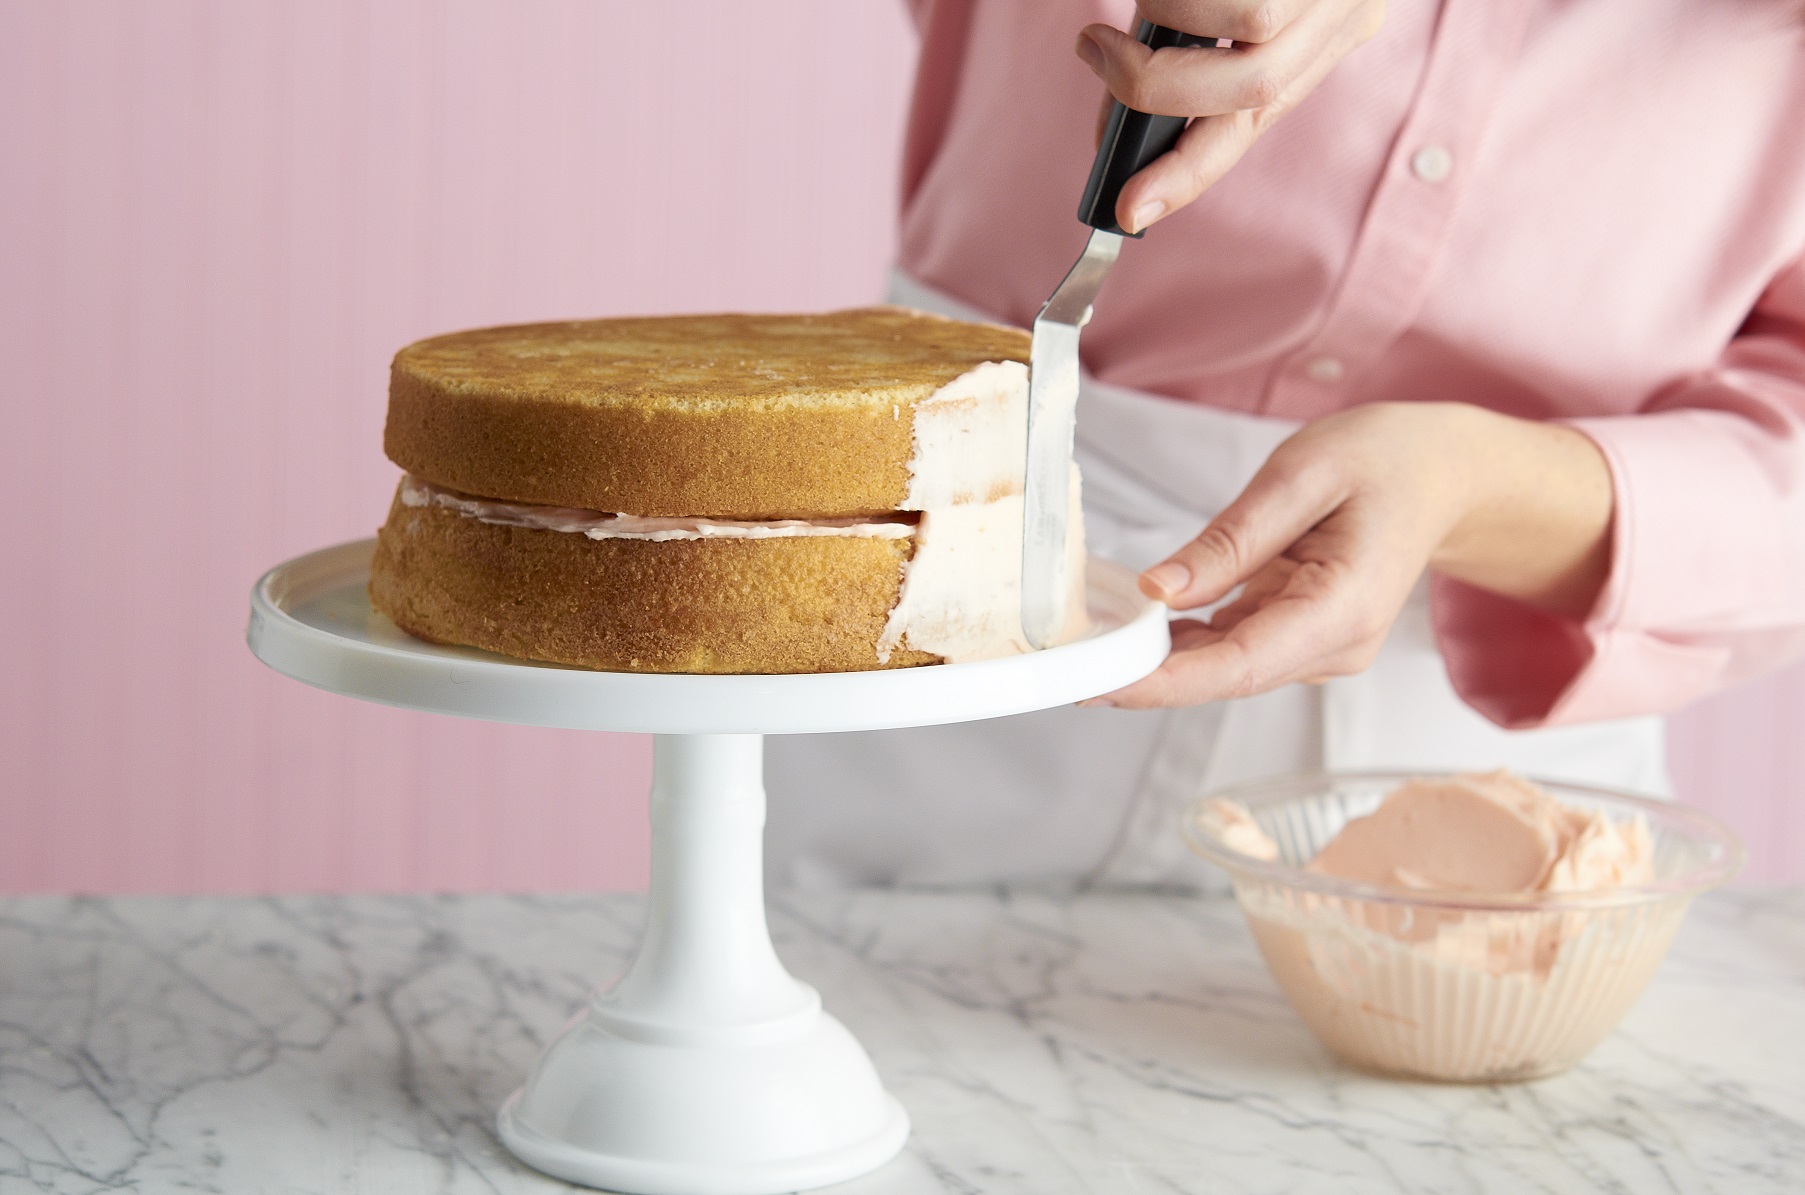 The Best Cake Scraper To Buy For Decorating Cakes